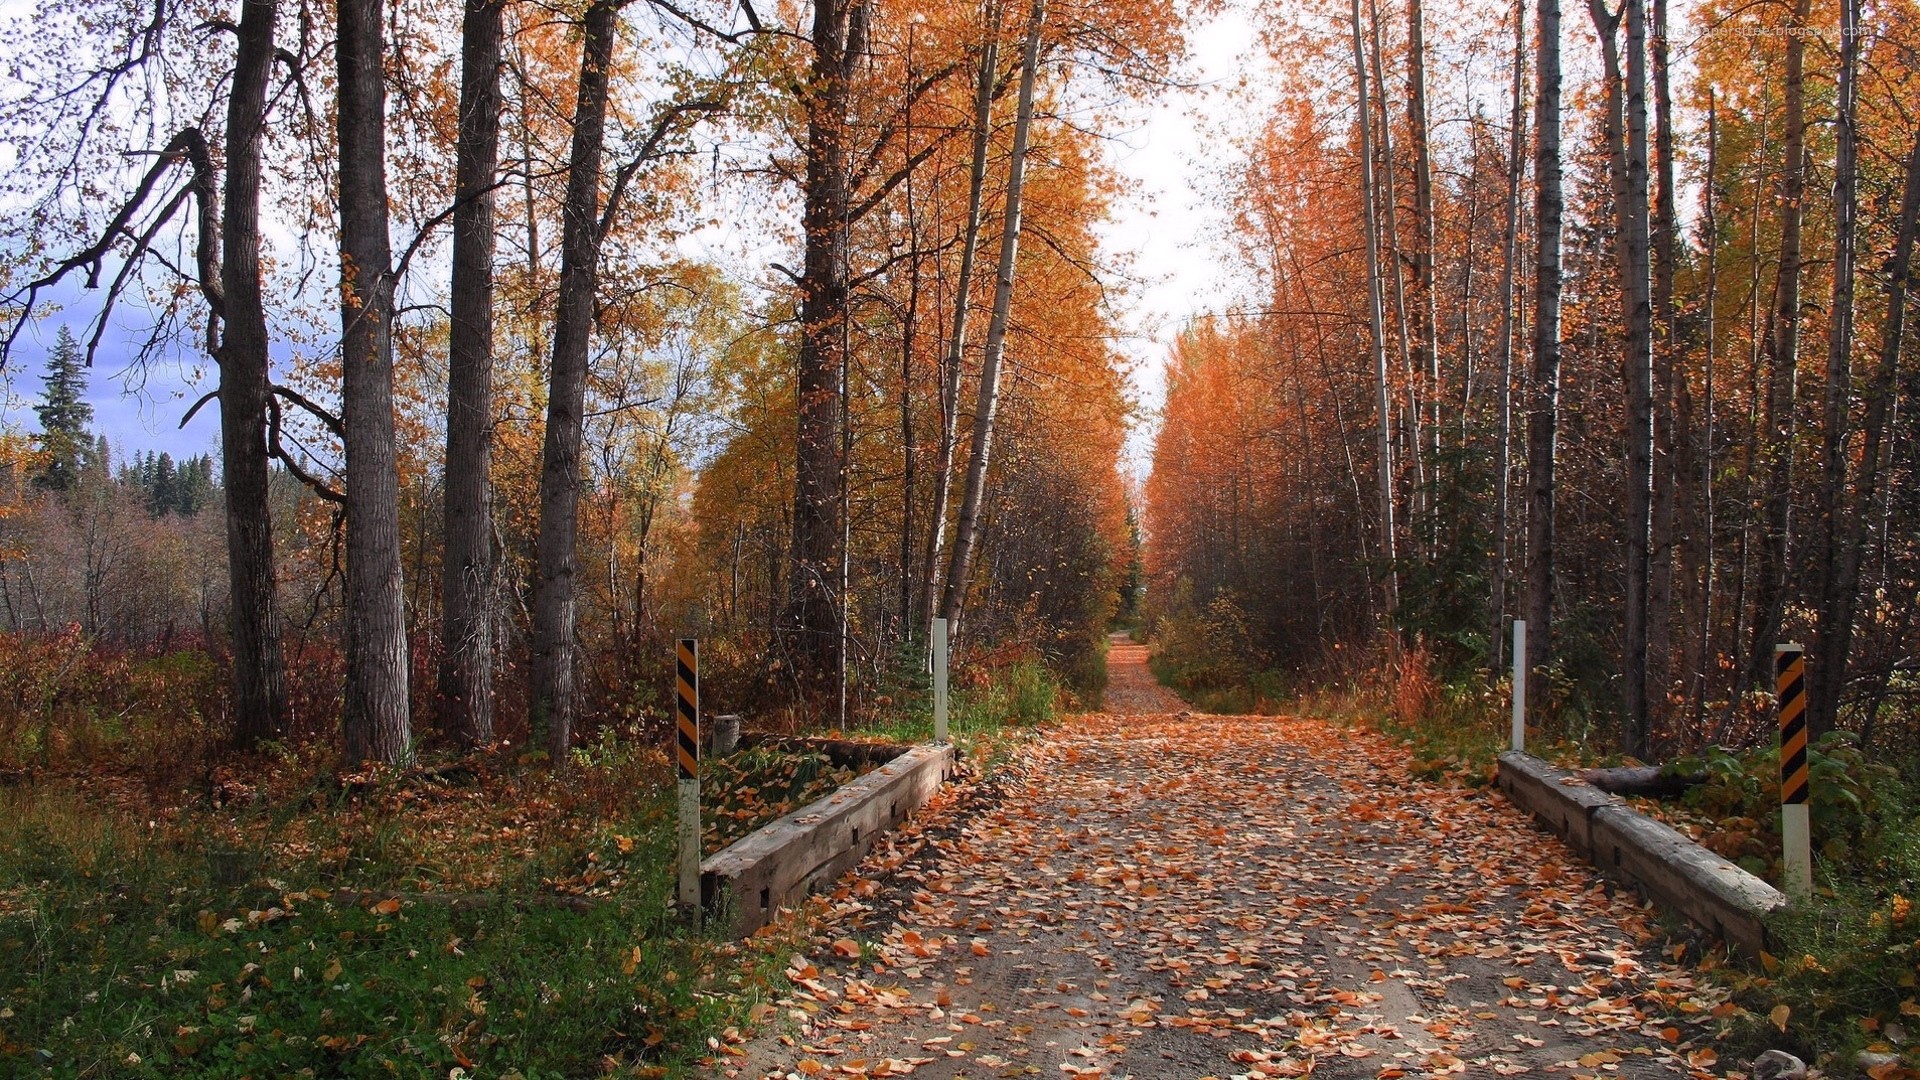 General 1920x1080 fall dirt road forest outdoors fallen leaves